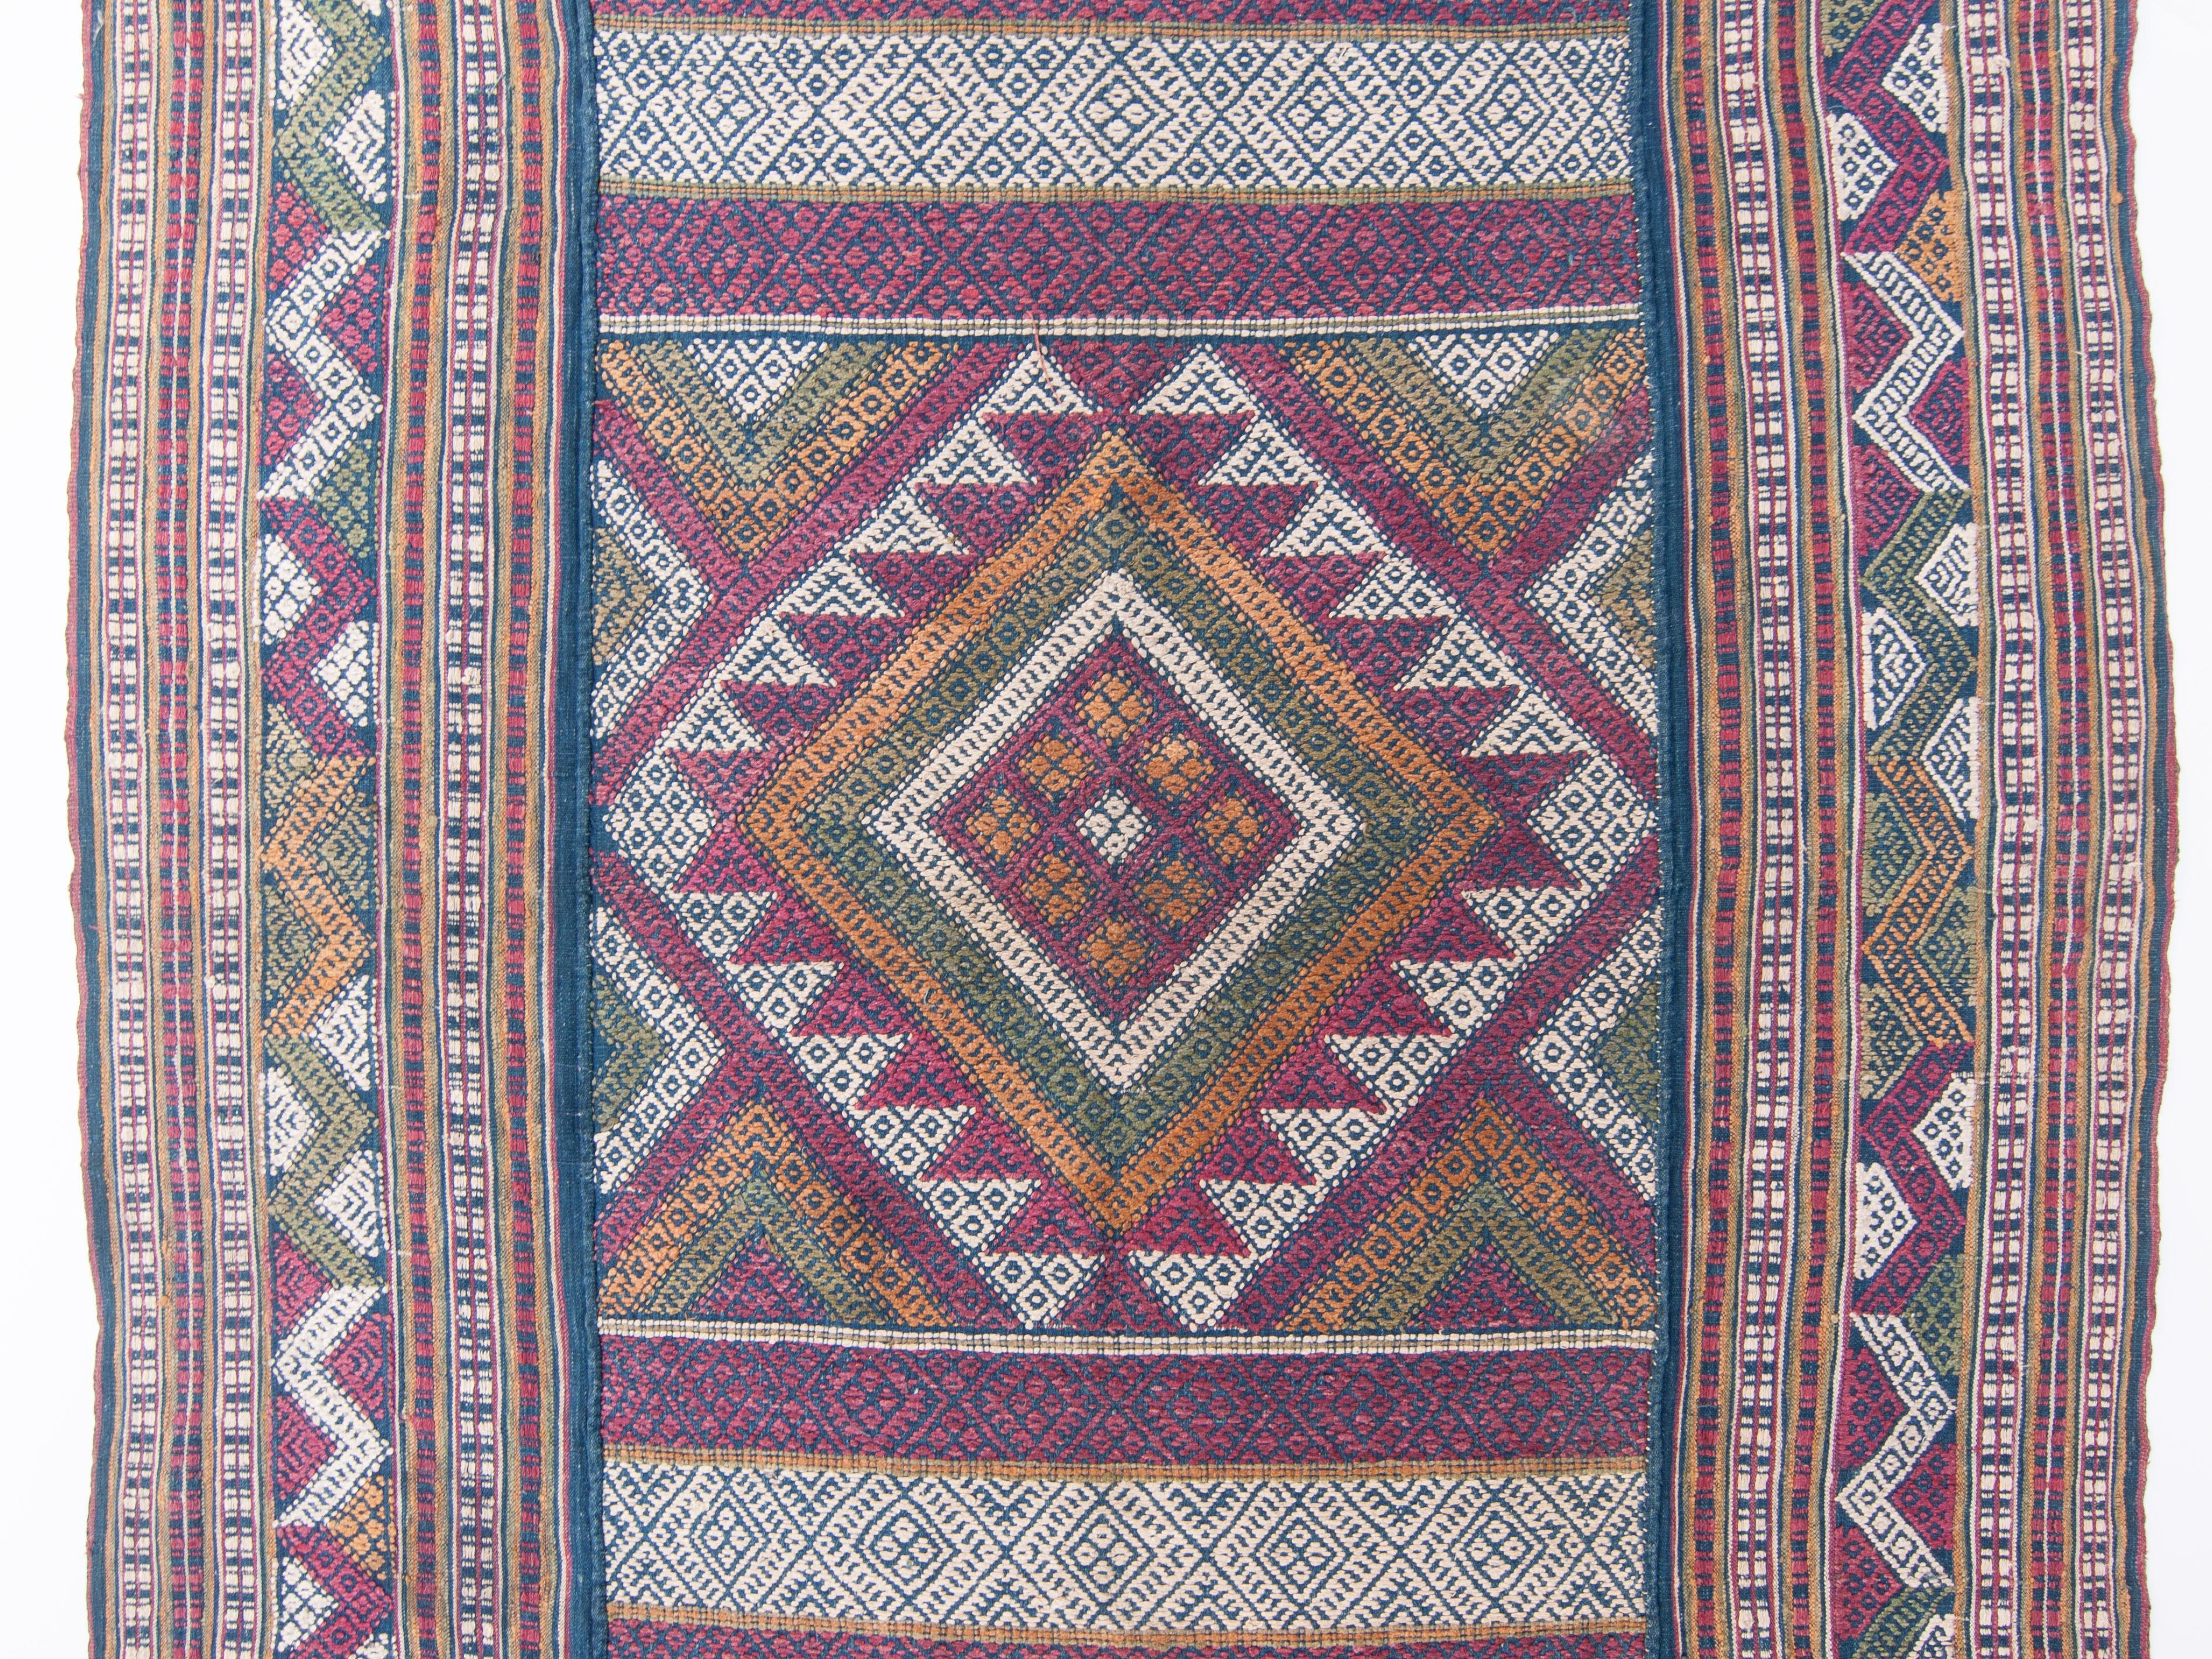 Vegetable Dyed Vintage Bhutanese Ceremonial Silk Textile, Chagsi Pangkheb, Early 20th Century